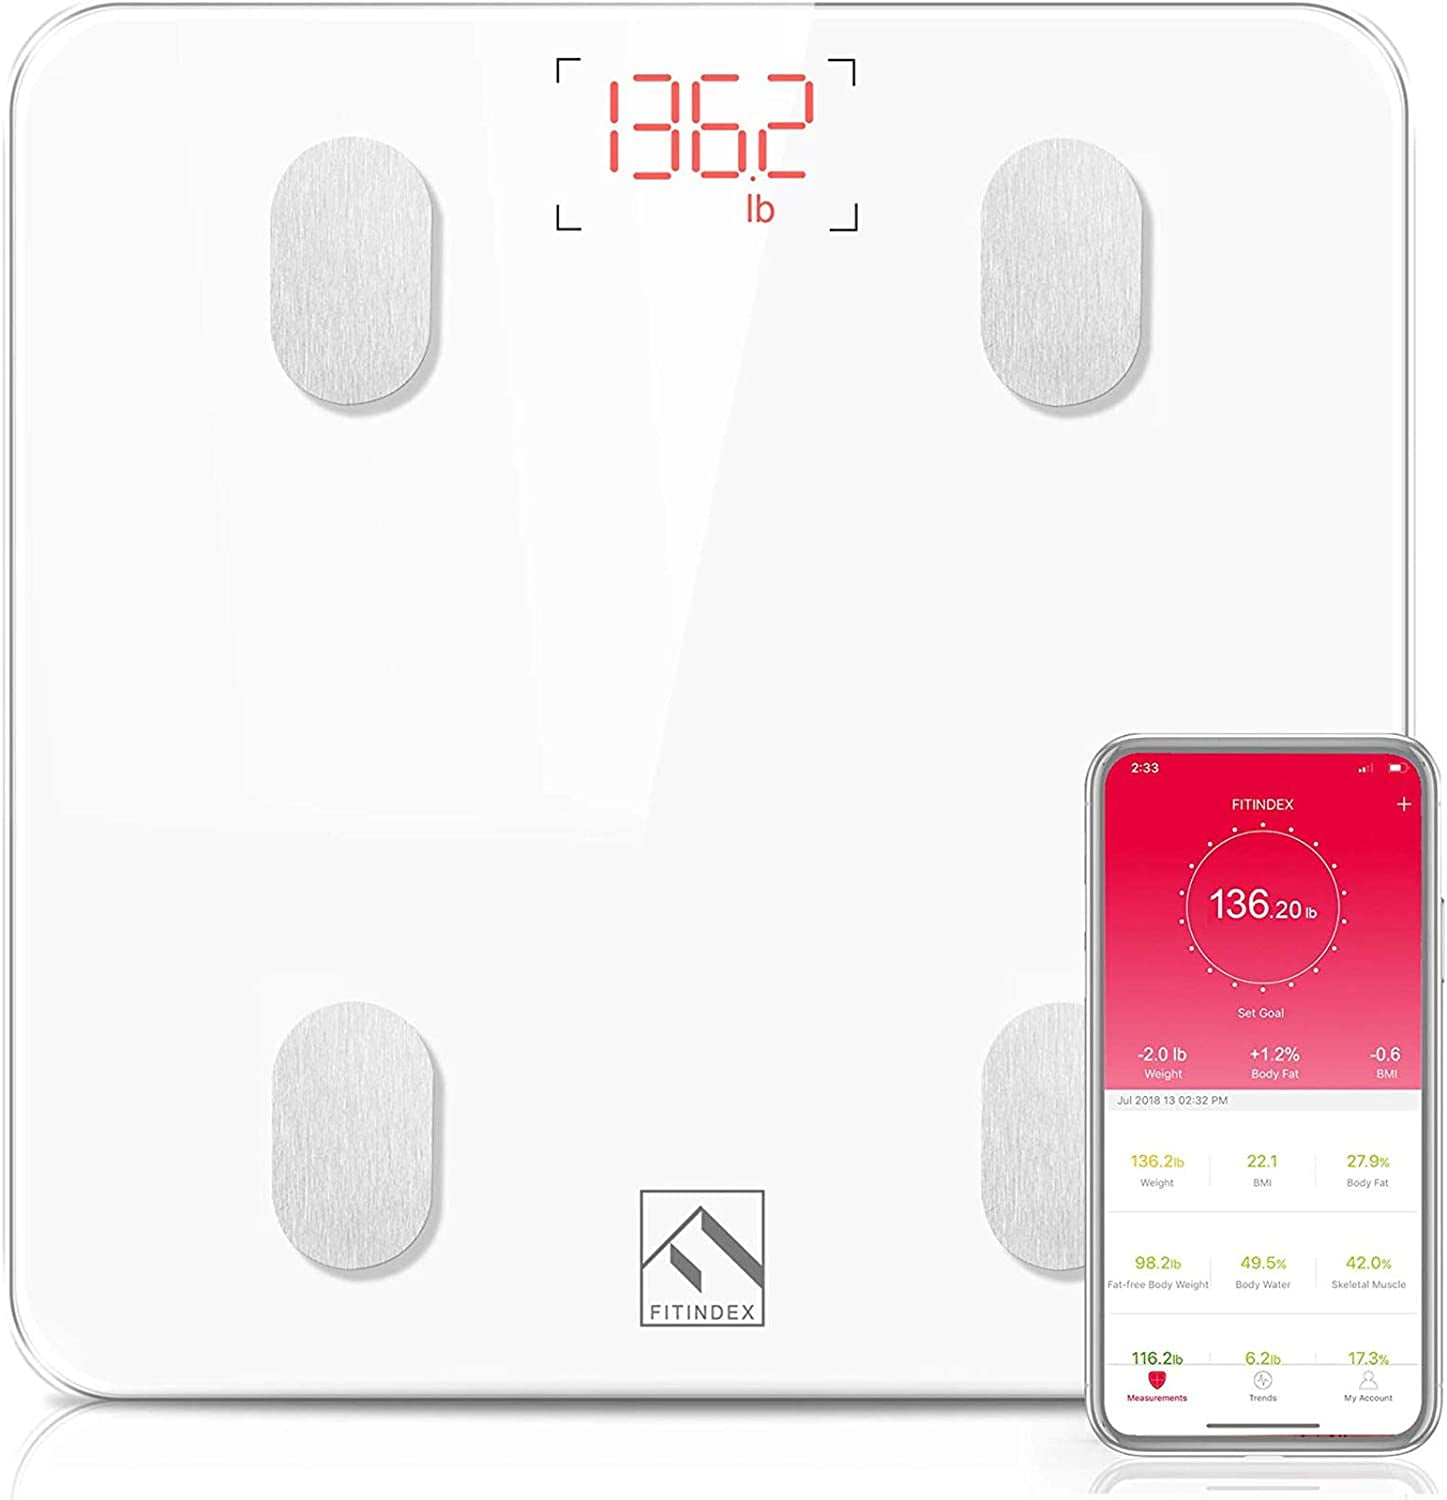  Garmin Index S2, Smart Scale with Wireless Connectivity,  Measure Body Fat, Muscle, Bone Mass, Body Water% and More, Black  (010-02294-02) : Health & Household